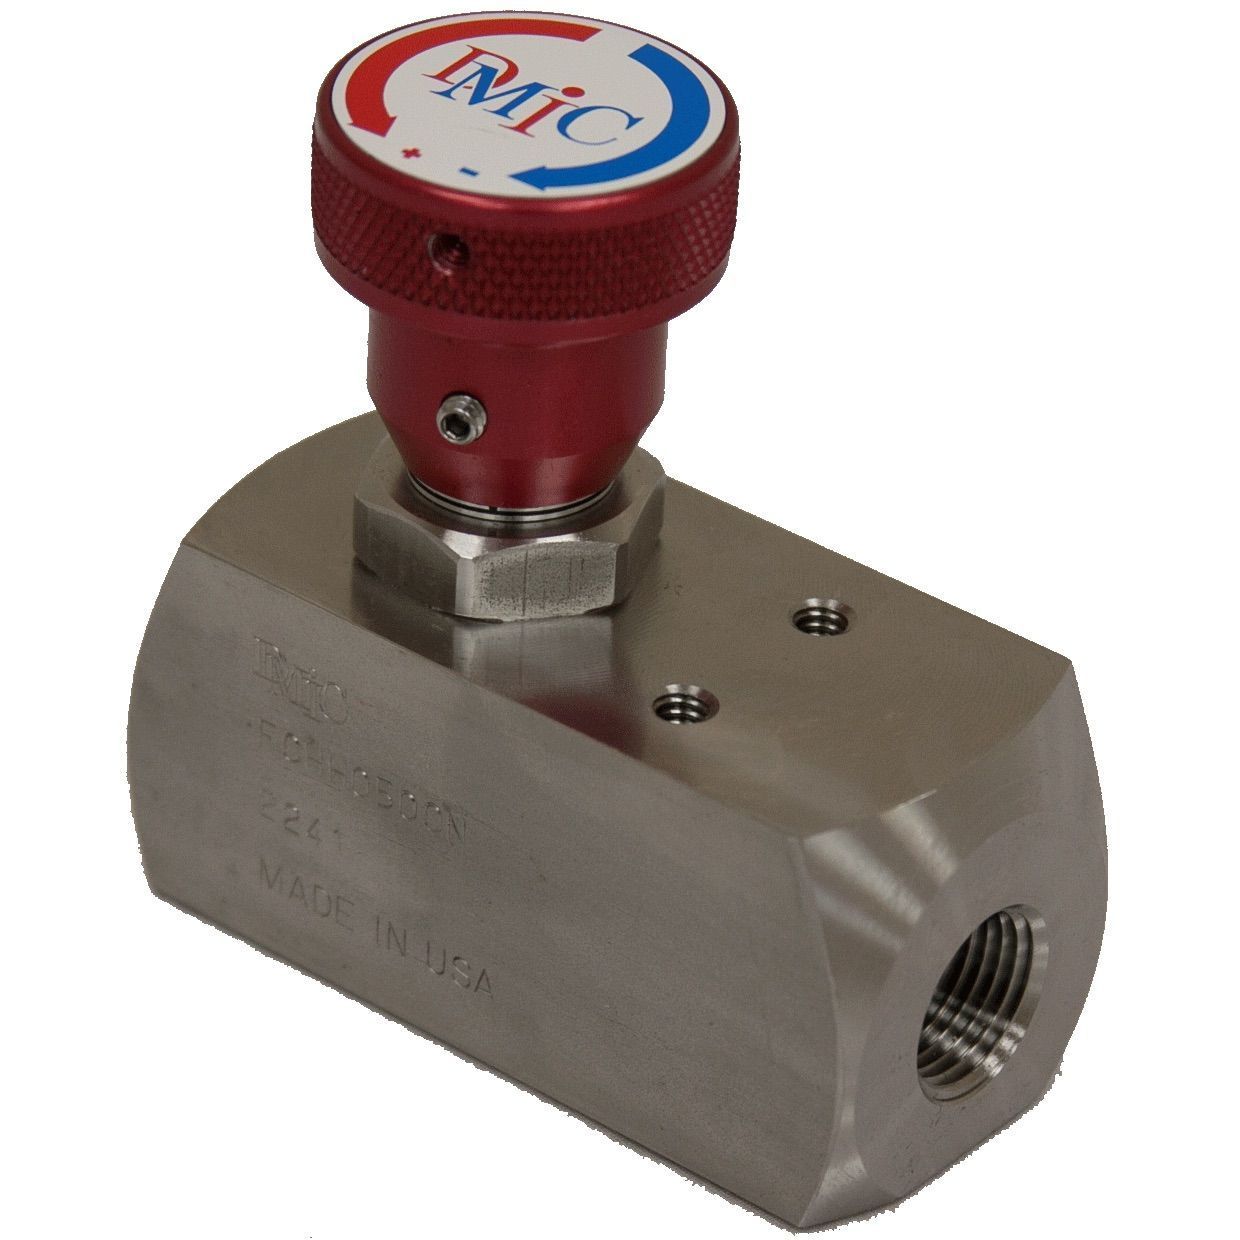 FCHH-2000N-1141 : DMIC Flow Control, Unidirectional, with Integrated Check, 2" NPT, Carbon Steel, 10000psi